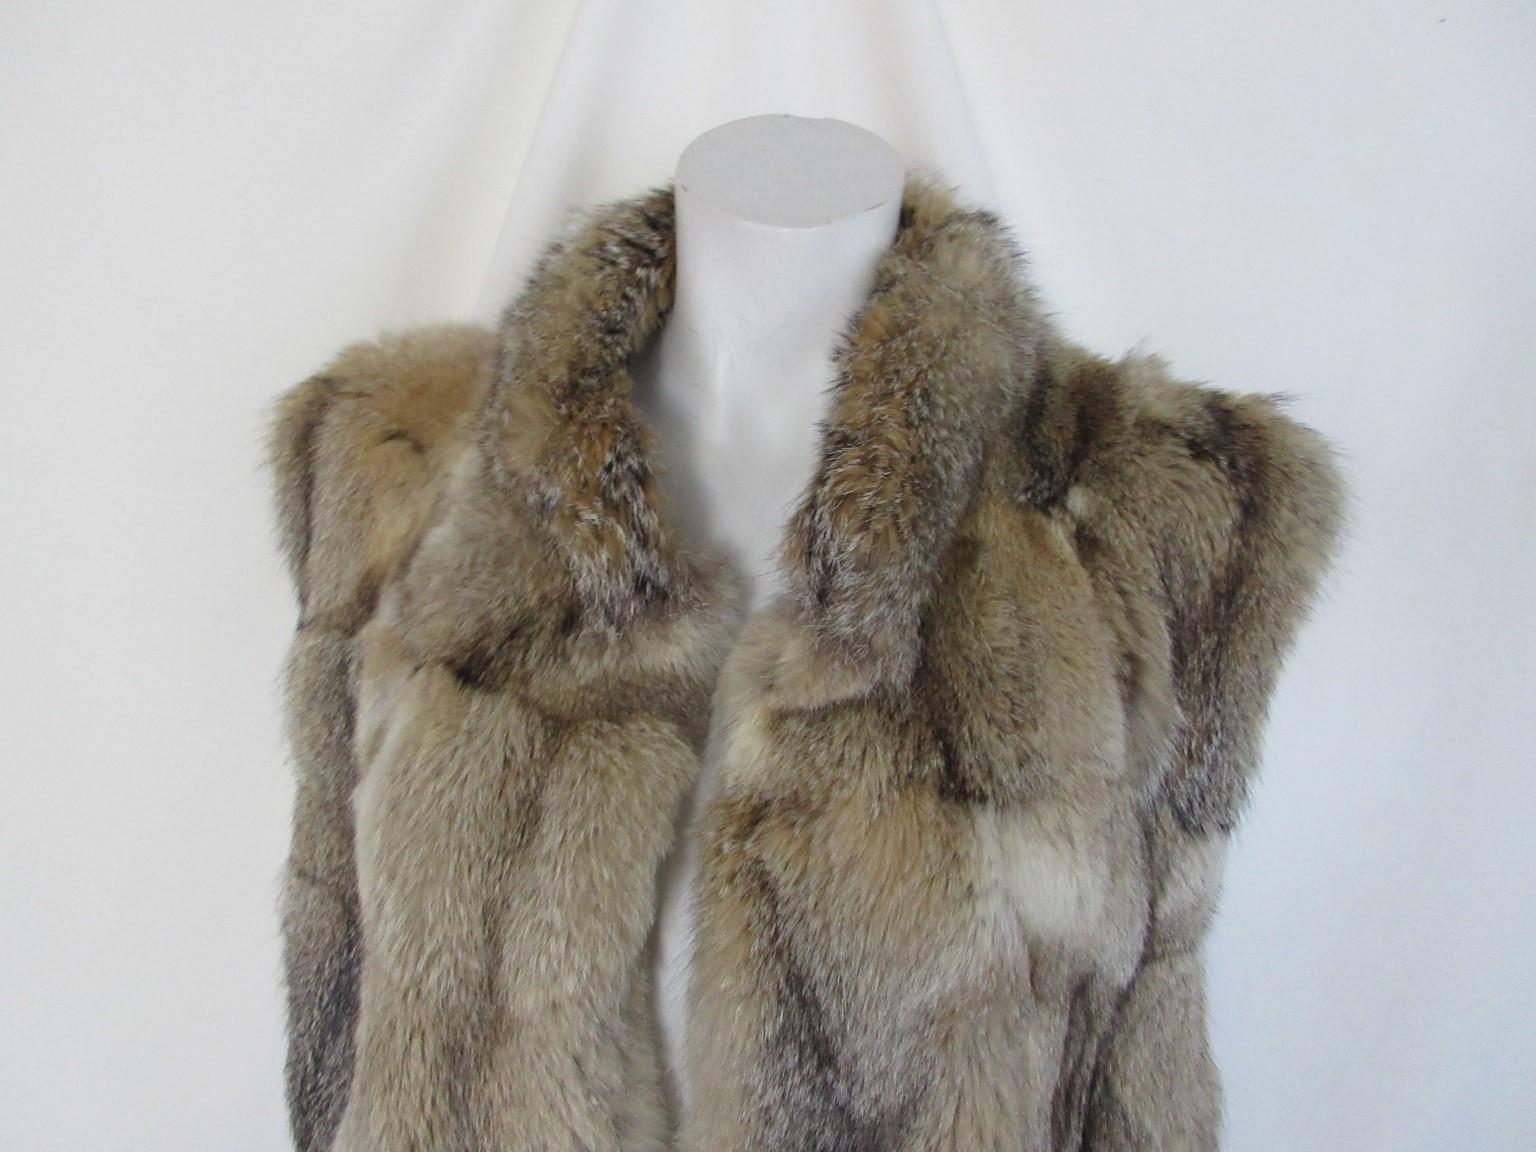 This vintage fur vest is made of soft quality fox fur.

We offer more luxury fur items, view our frontstore

Details:
Sleeveless, no pockets / buttons
This vest can be worn by male or female.
Can be worn on leather jacket or sweater or inside a